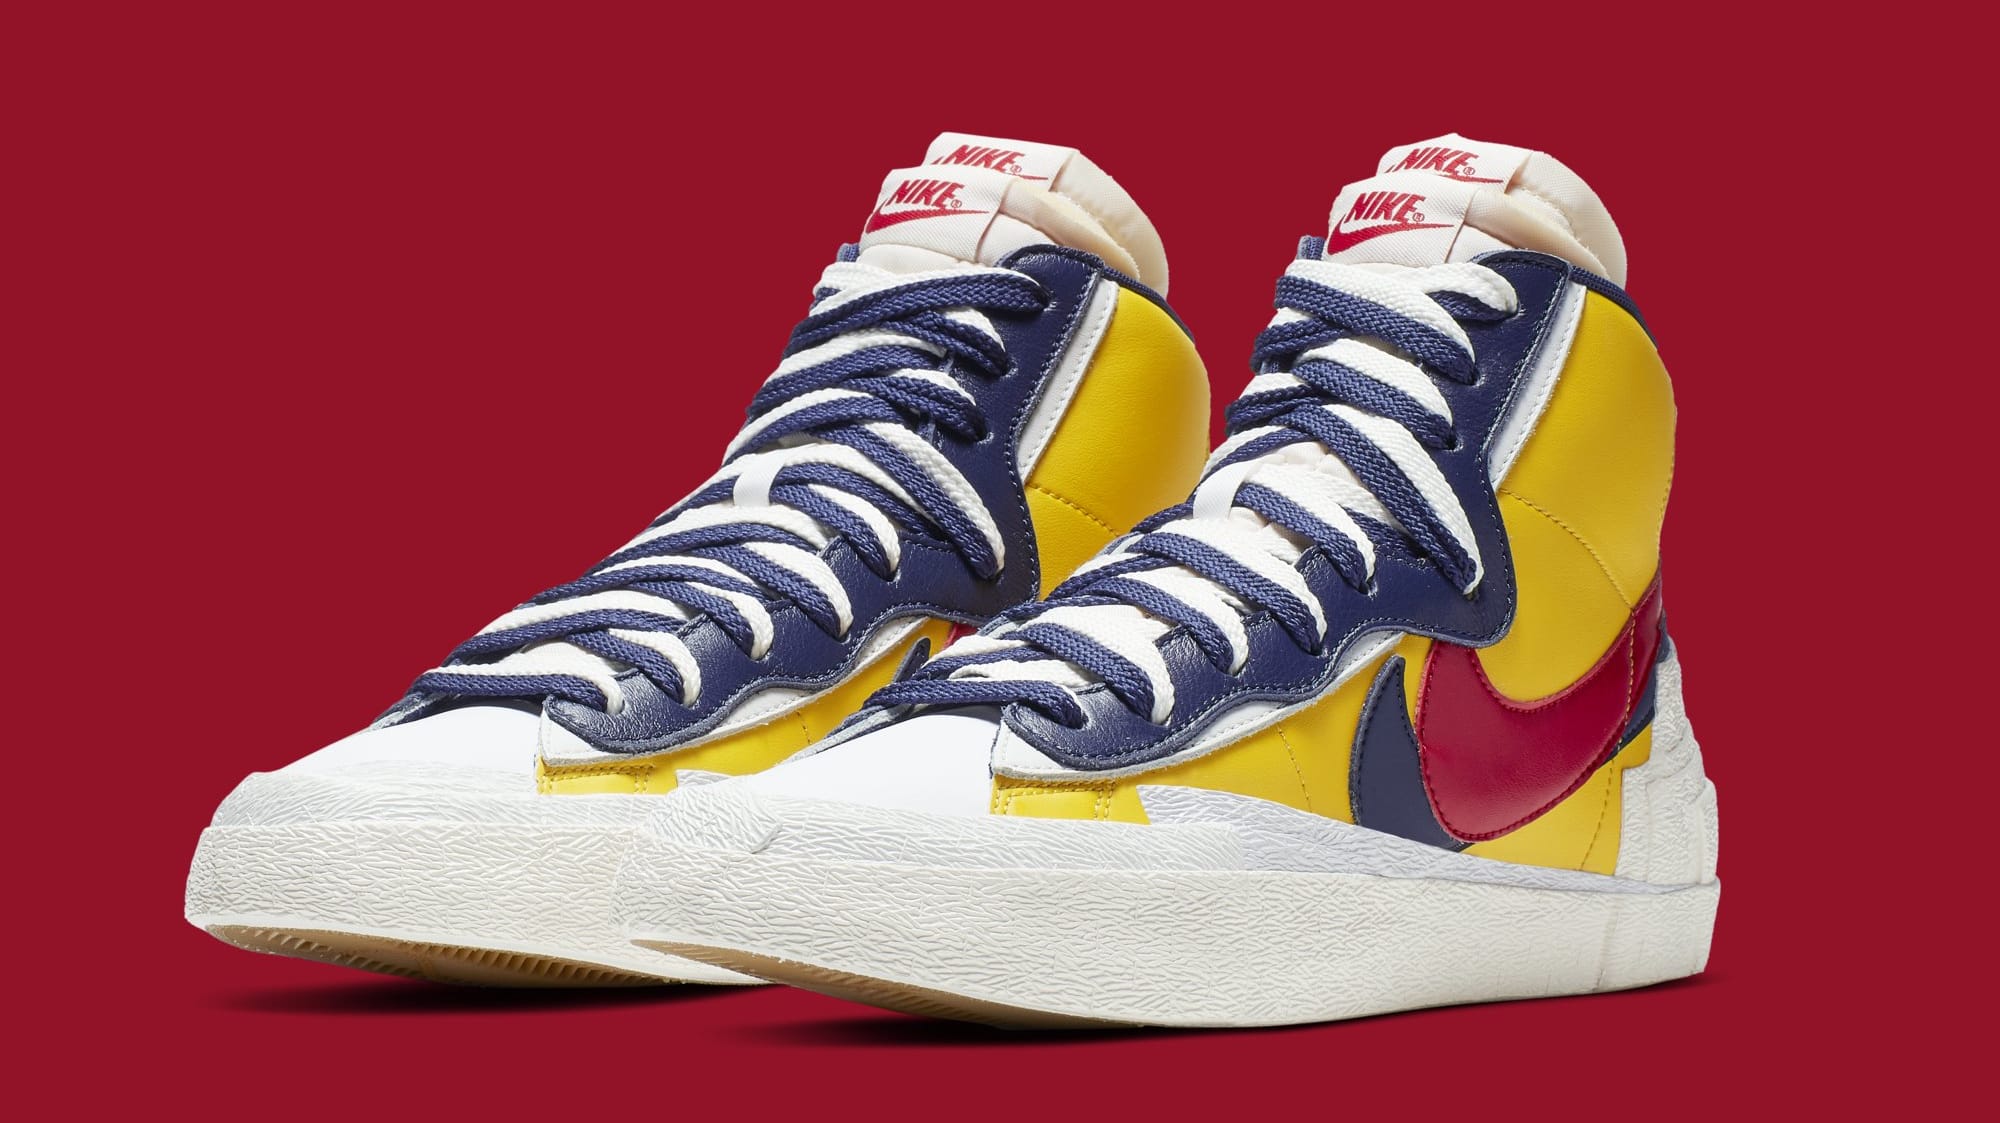 Sacai x Nike Blazer High BV0072-001 BV0072-700 Collection Release Date Sole Collector